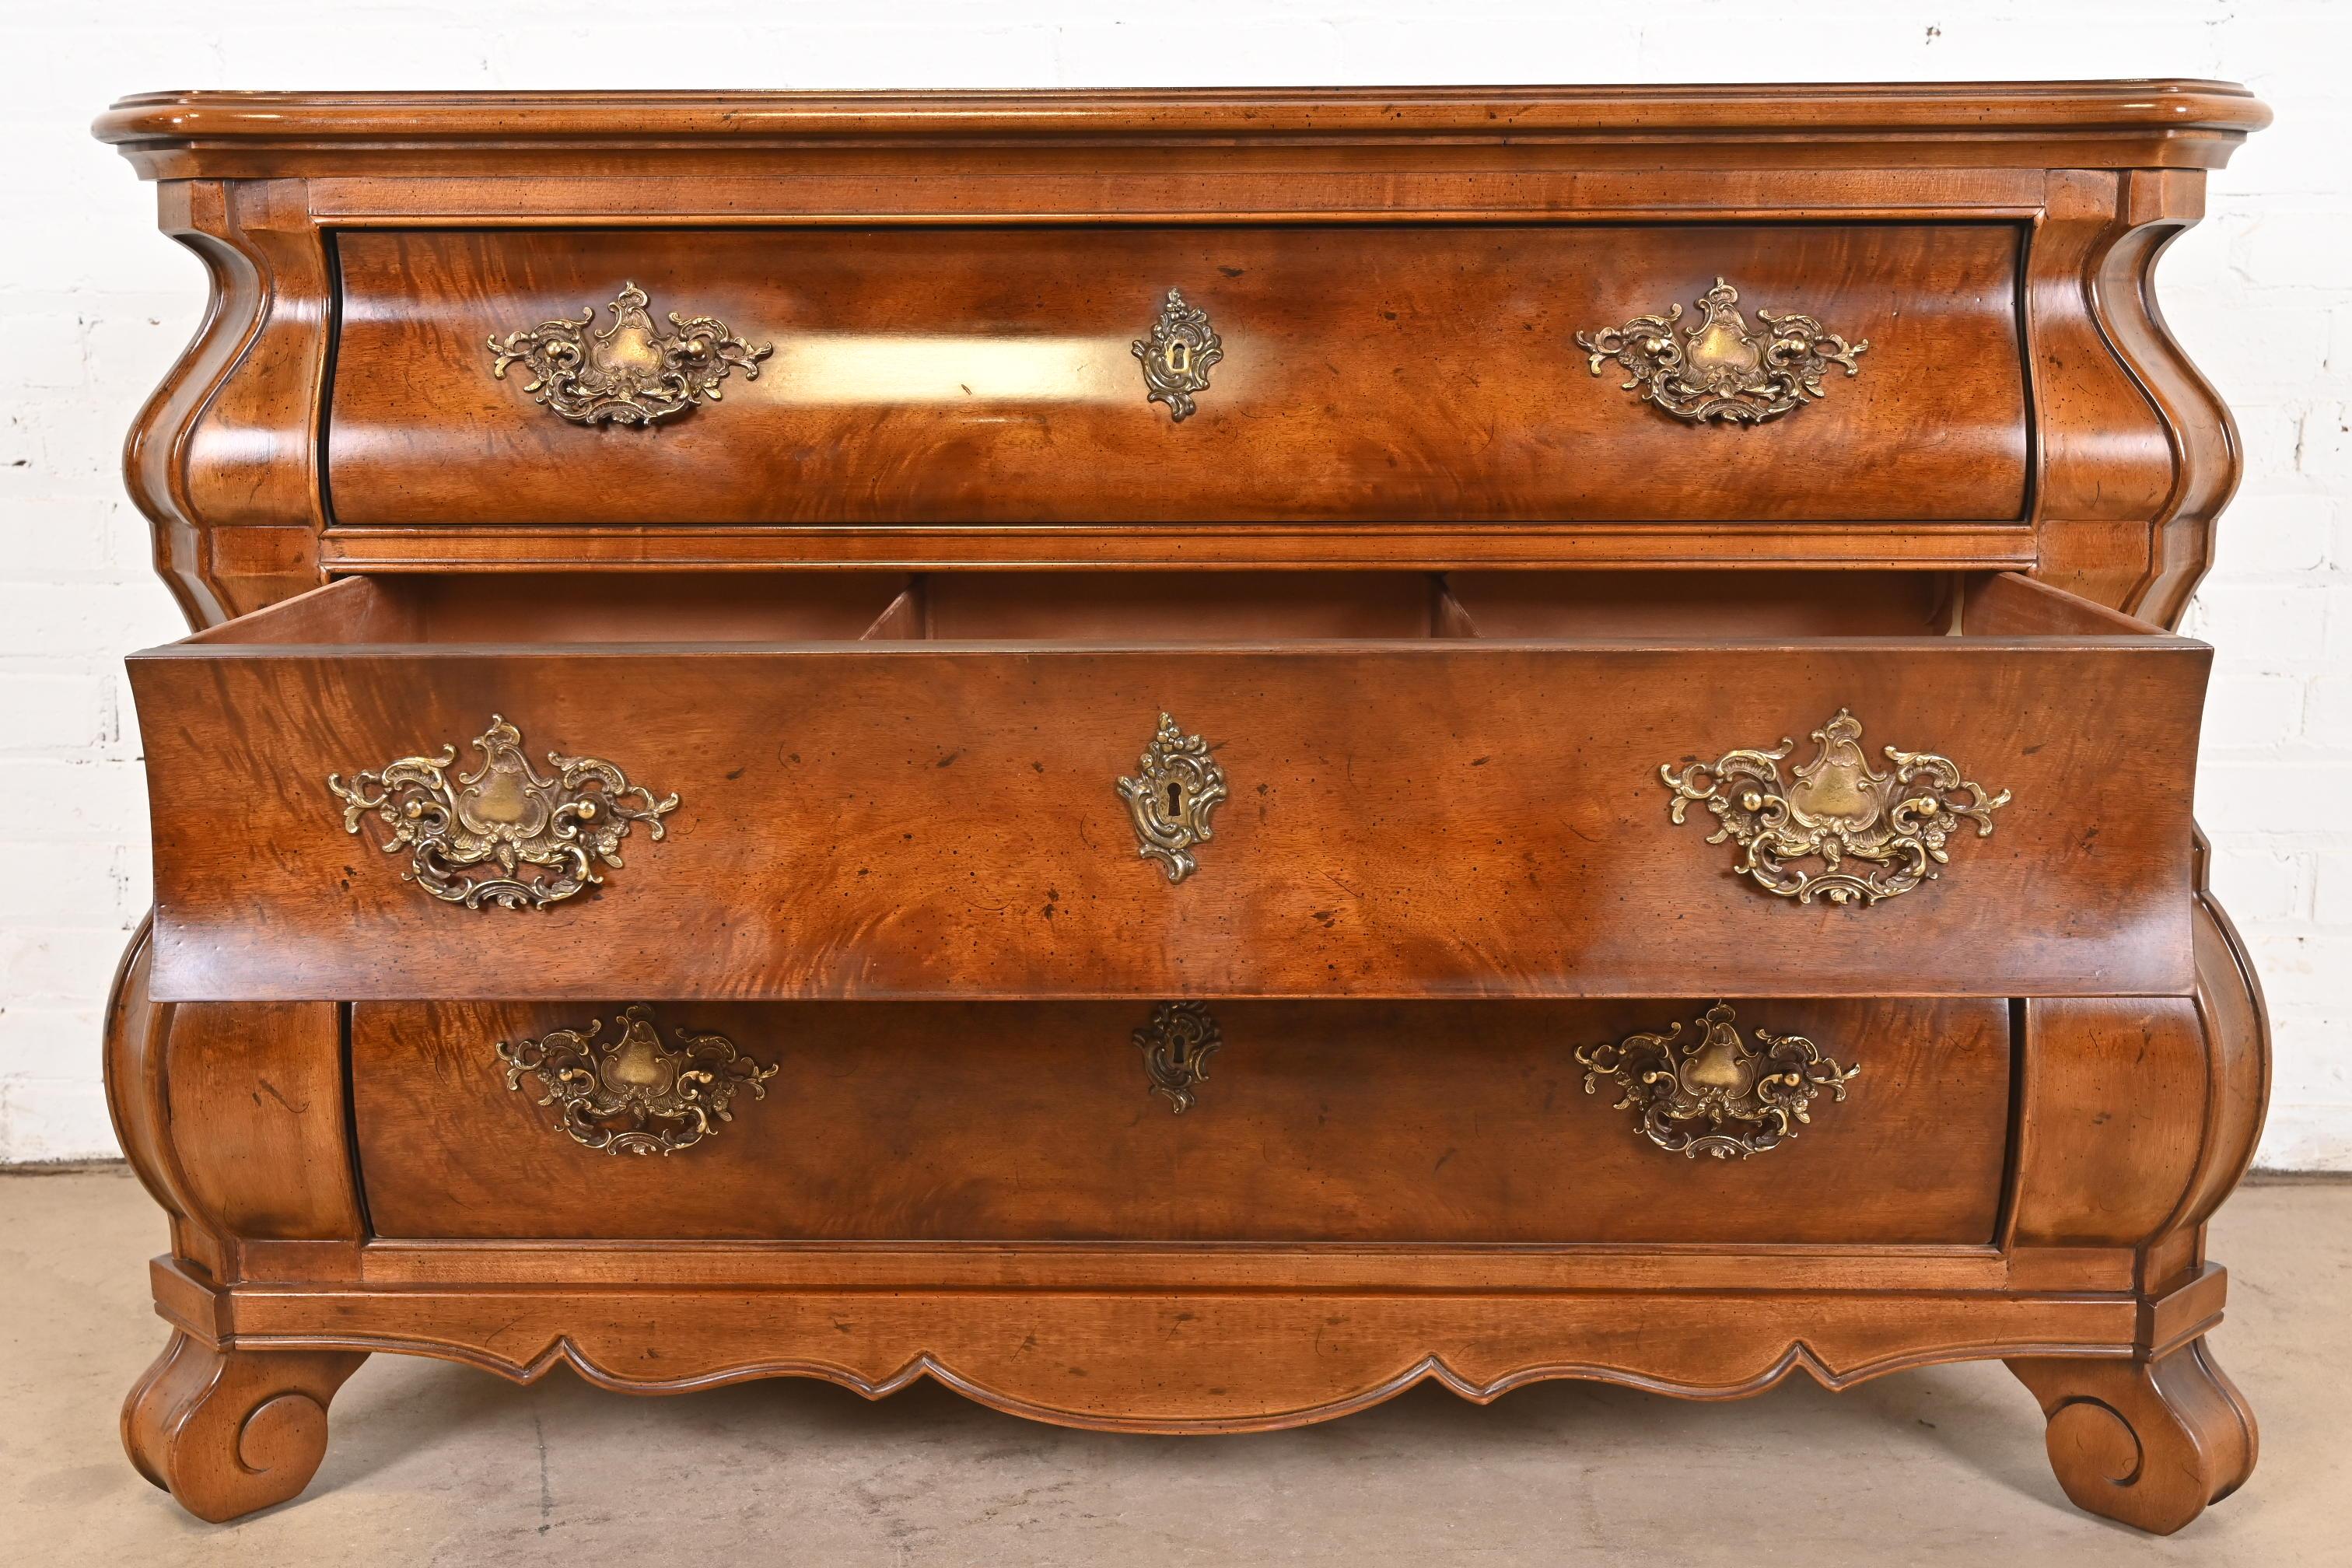 Henredon Italian Baroque Burled Mahogany Bombay Chests or Commodes, Pair For Sale 6